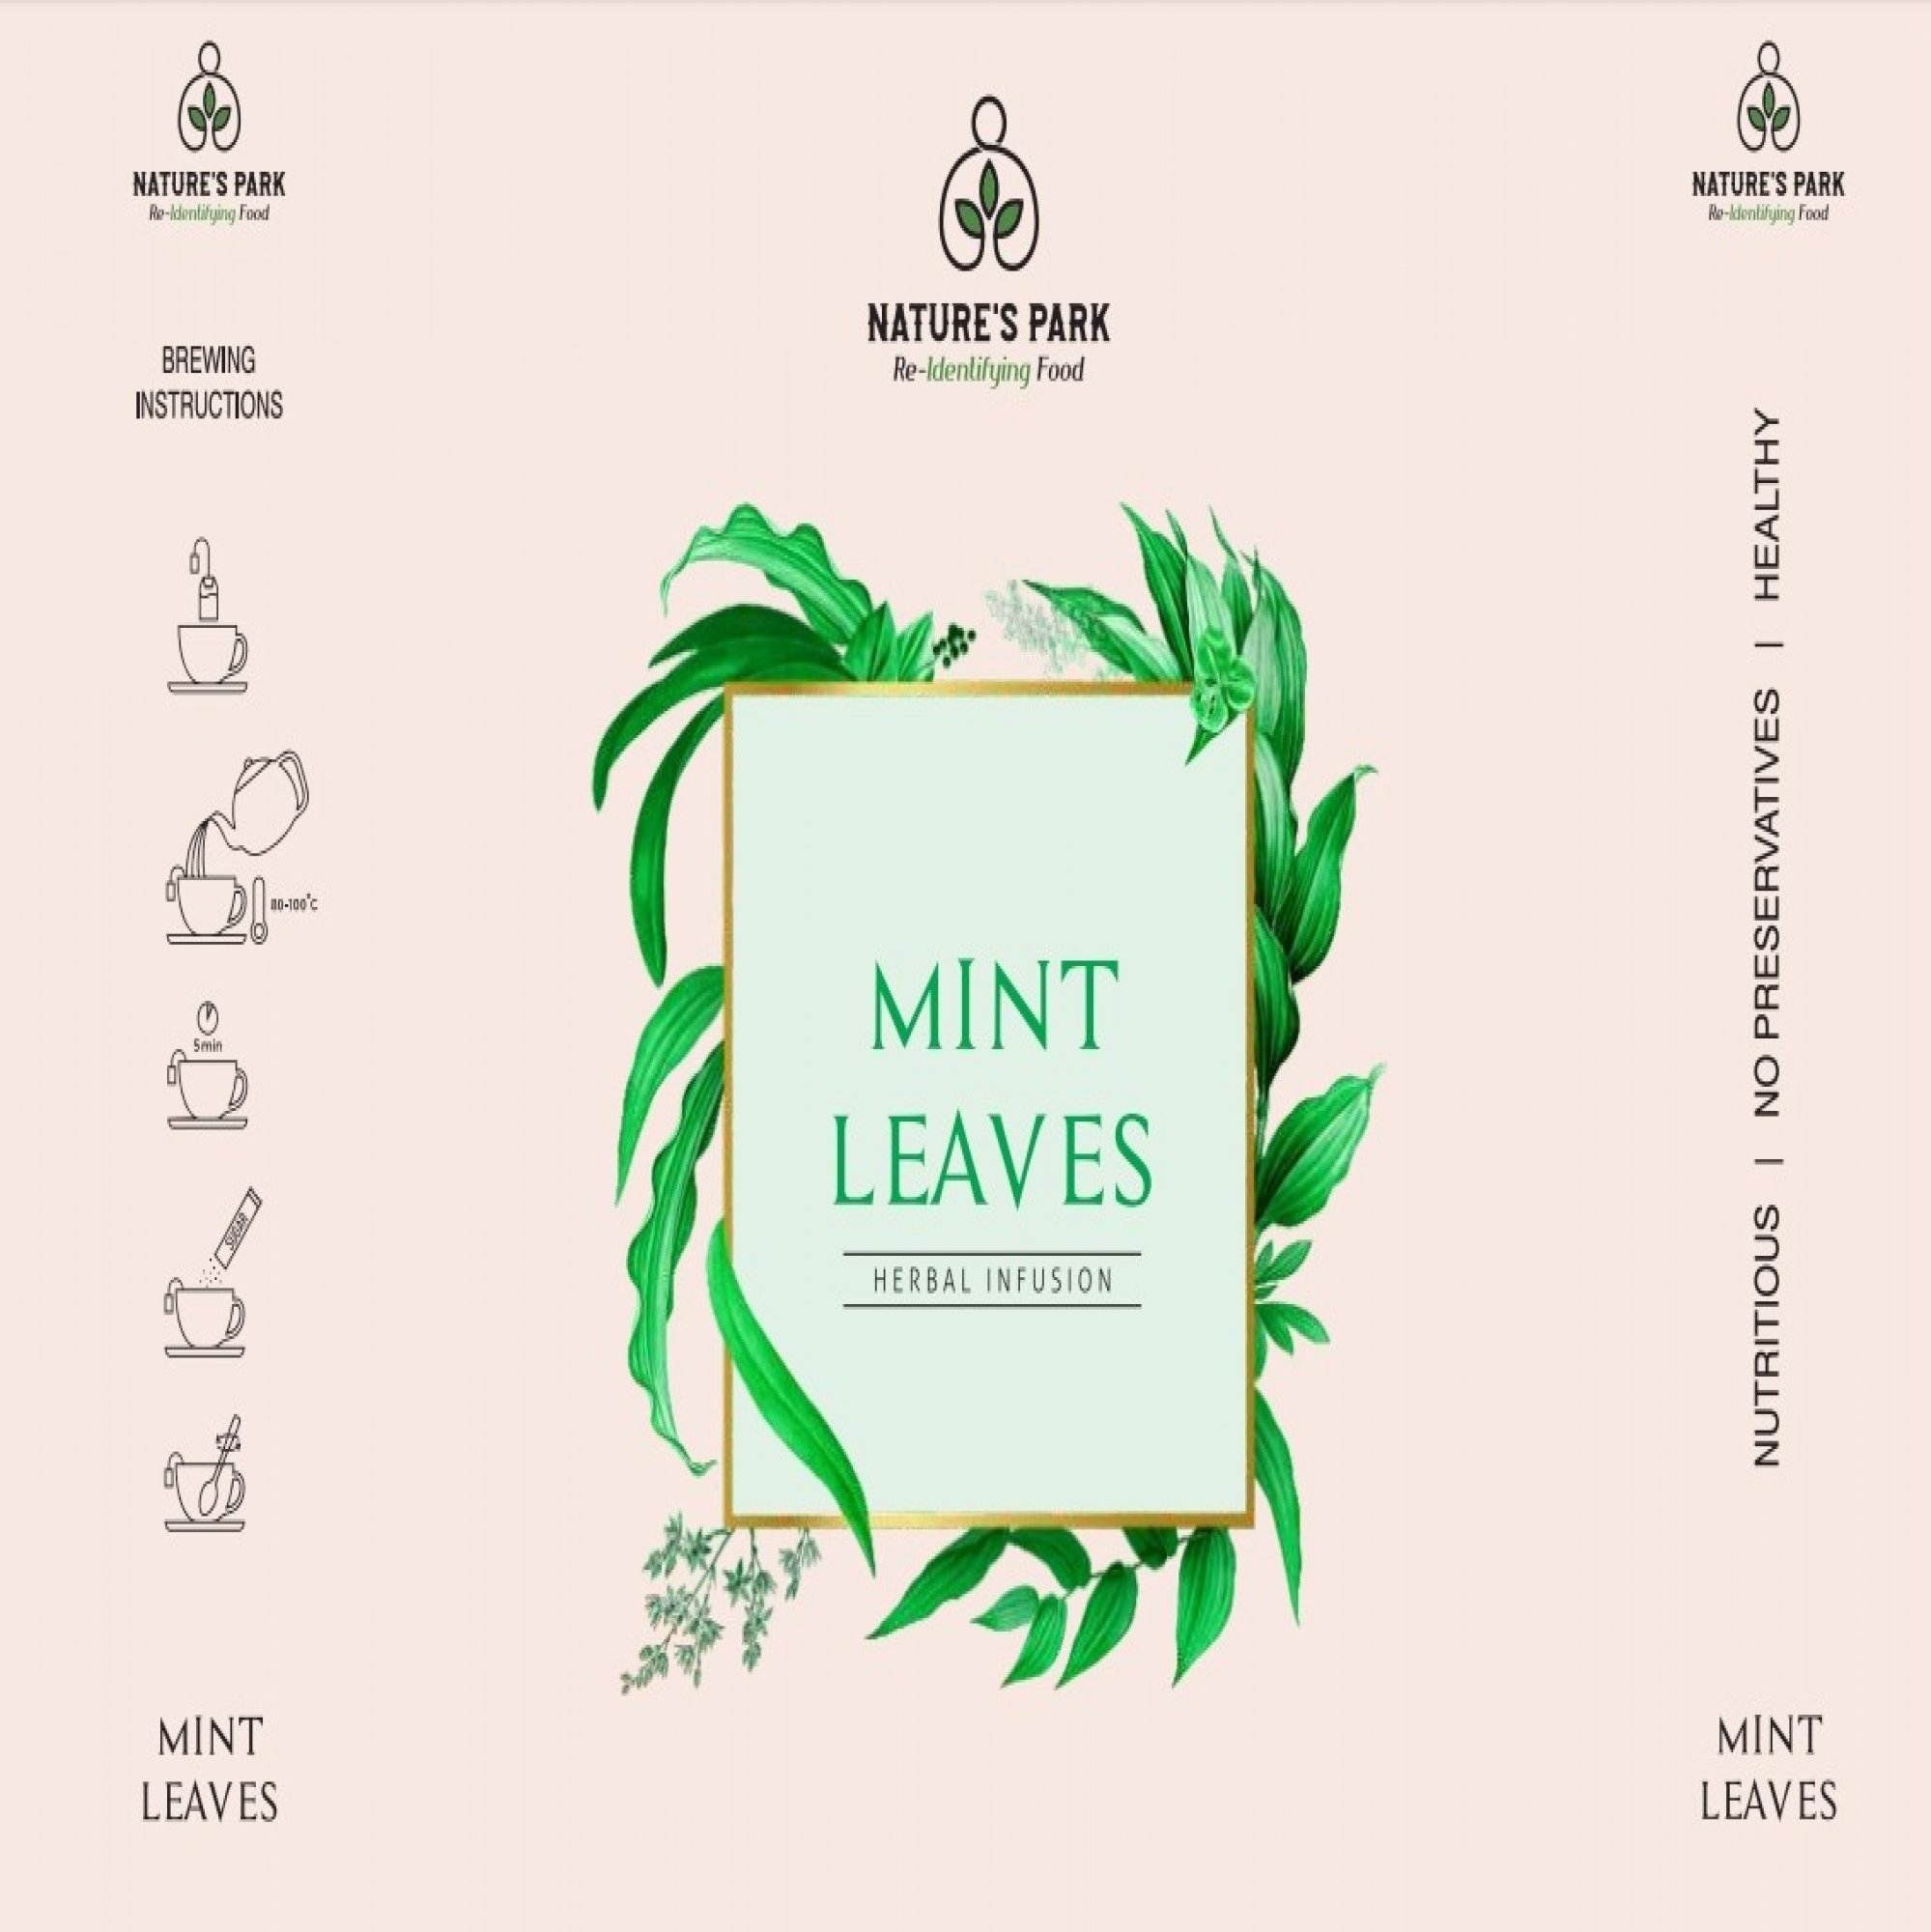 Product: Natures Park Mint Leaves Herbal Infusion – Easy Digestion, Cool and Refreshing Peppermint Mint Herbal Infusion Tea Box